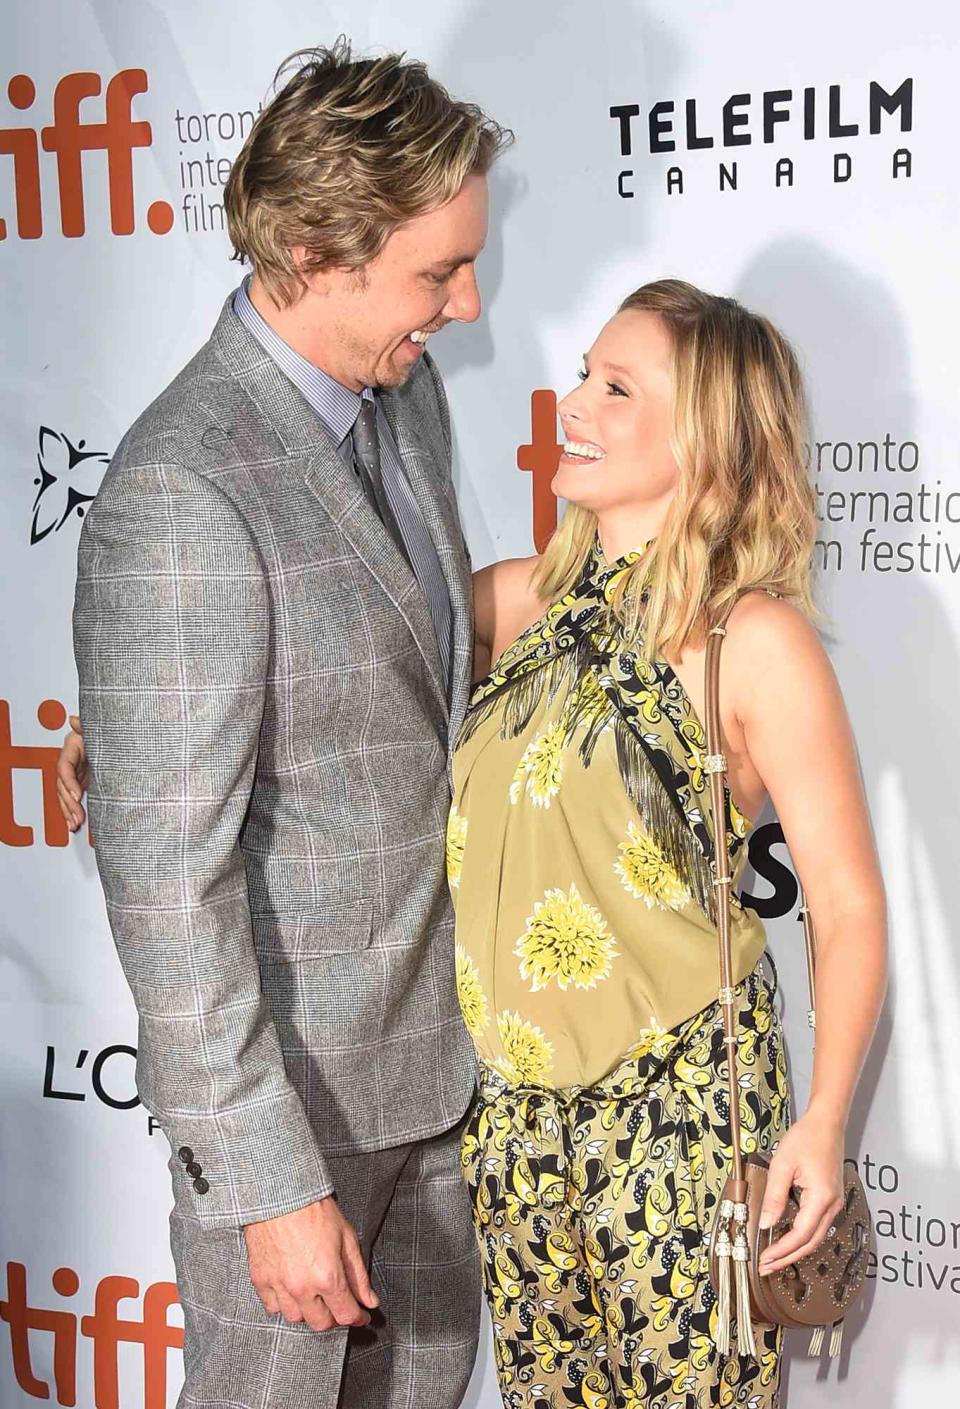 Actors Dax Shepard (L) and Kristen Bell attend 'The Judge' premiere during the 2014 Toronto International Film Festival at Roy Thomson Hall on September 4, 2014 in Toronto, Canada